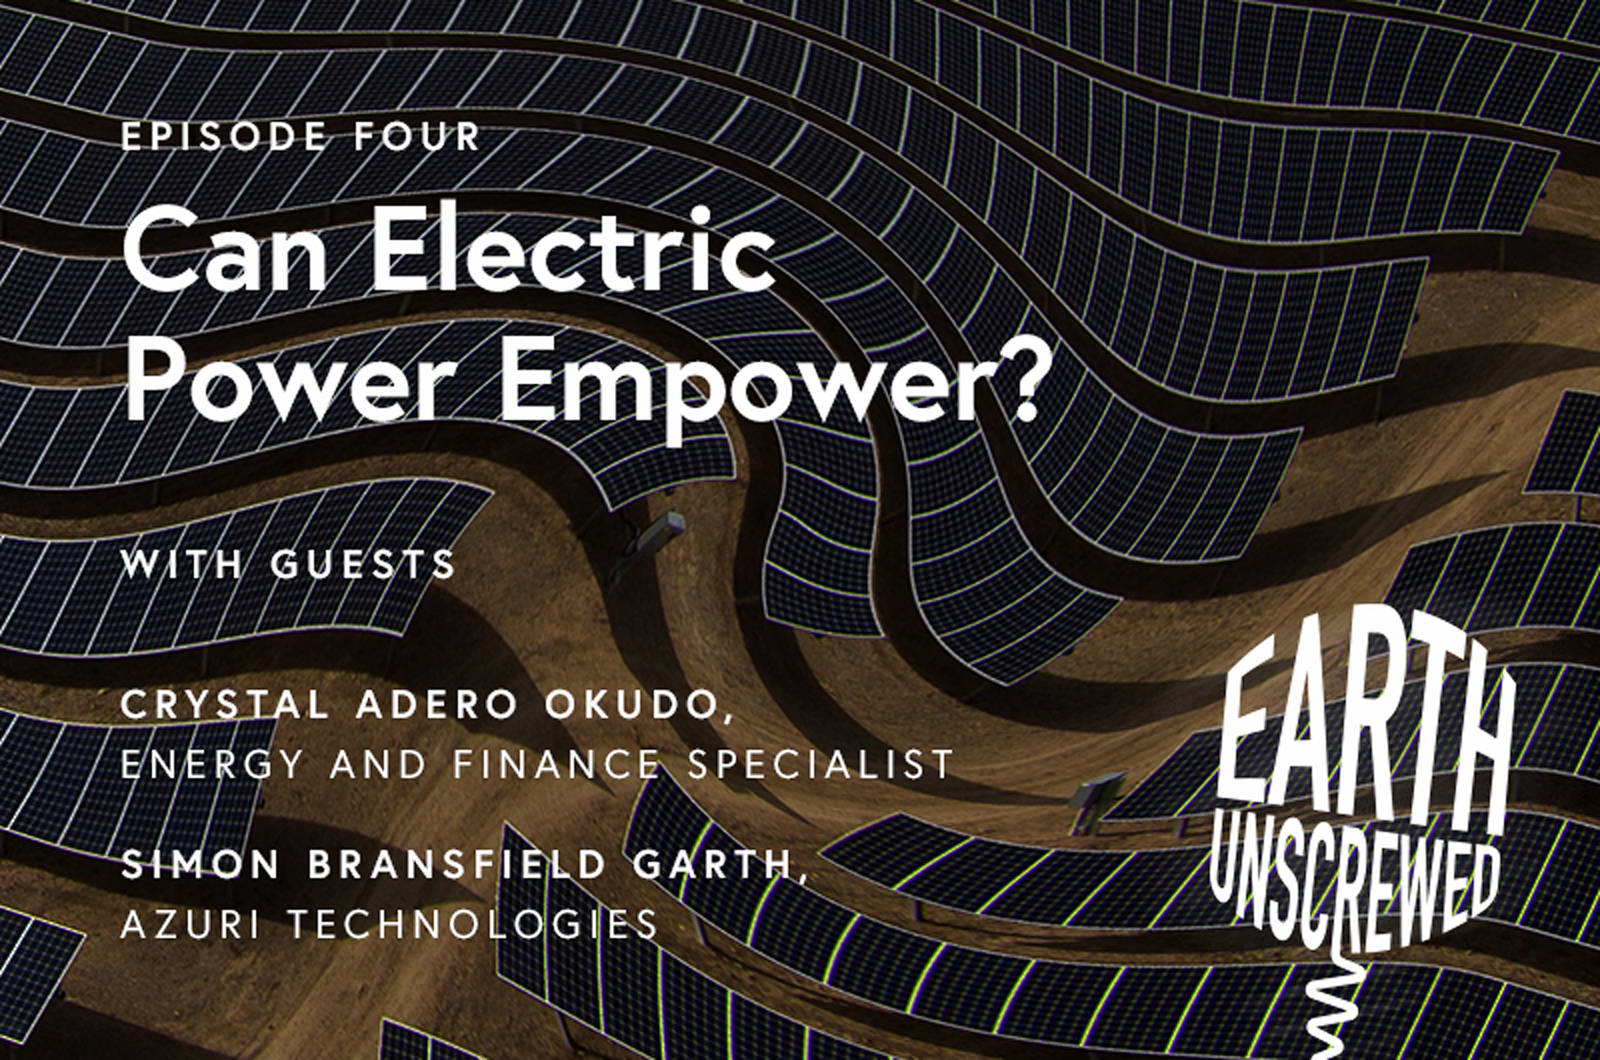 Solar panels in the background. Over the image in white text reads 'Episode four. Can electric power empower? with guests Crystal Adero Okudo, Energy and Finance Specialist, Simon Bransfield Garth, Azuri Technologies'